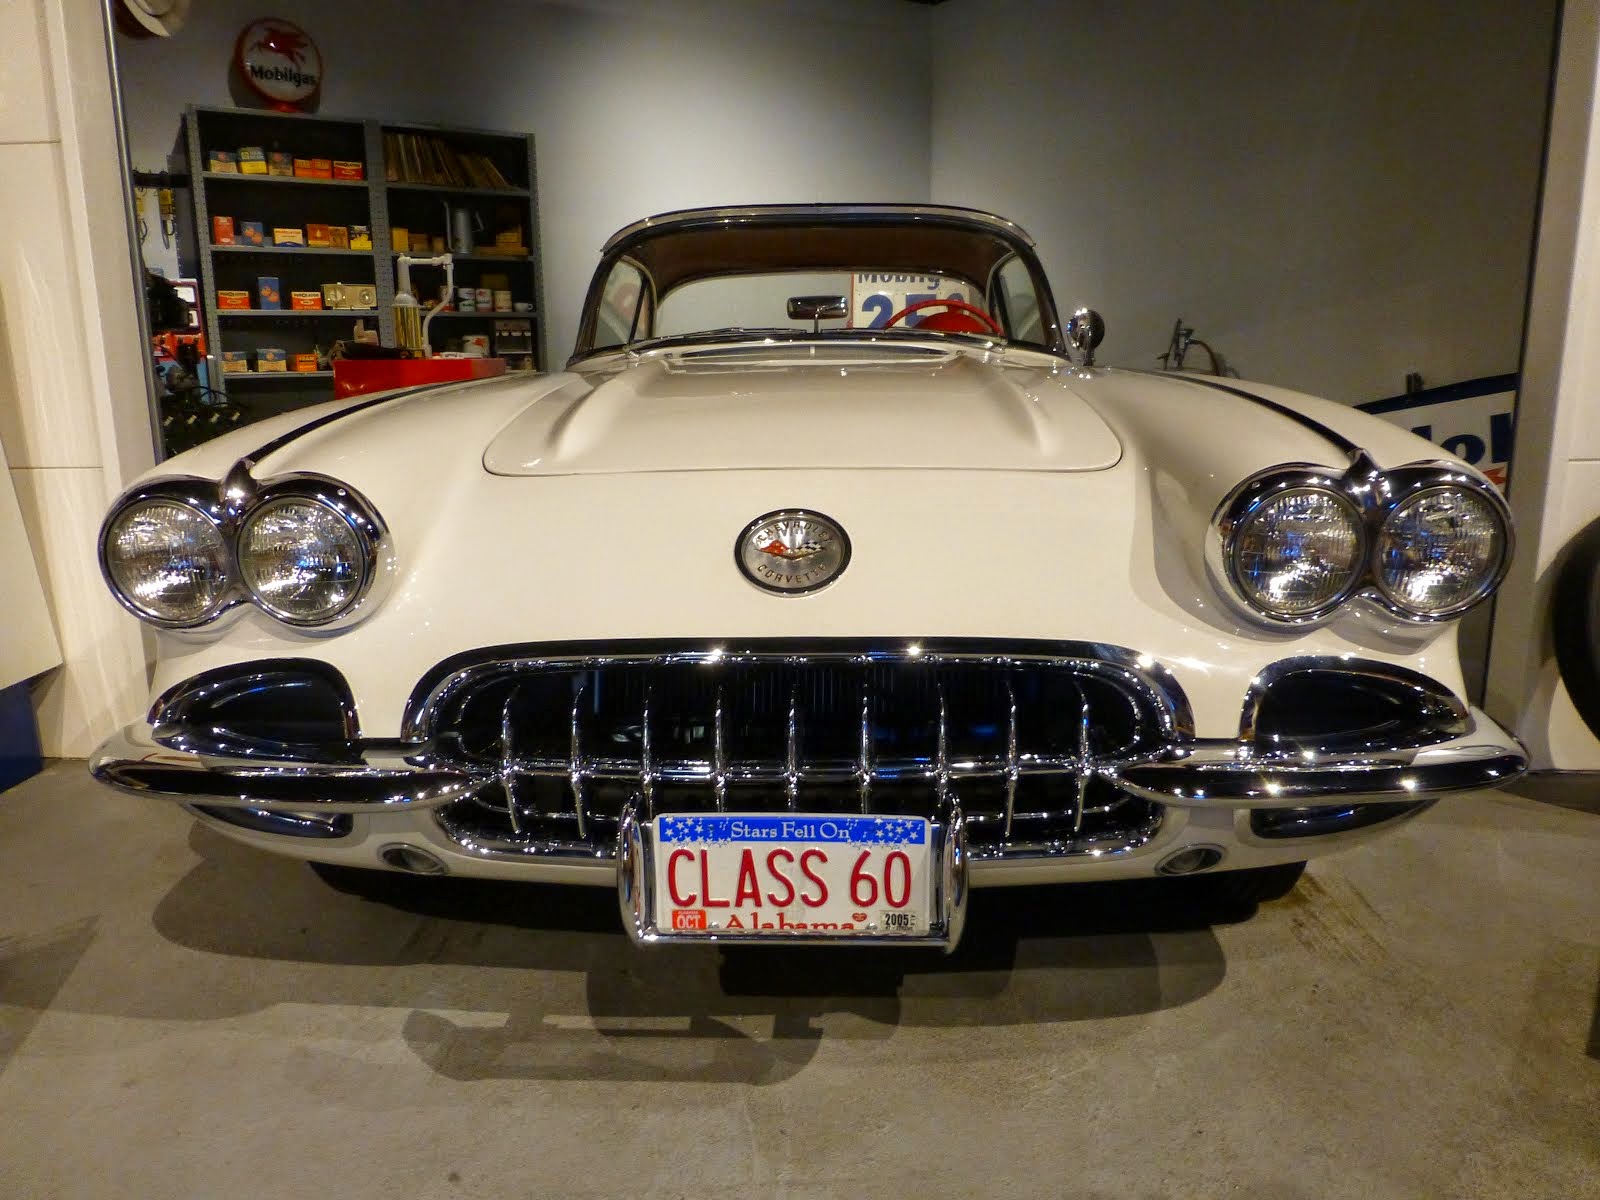 A Visit to the Corvette Factory